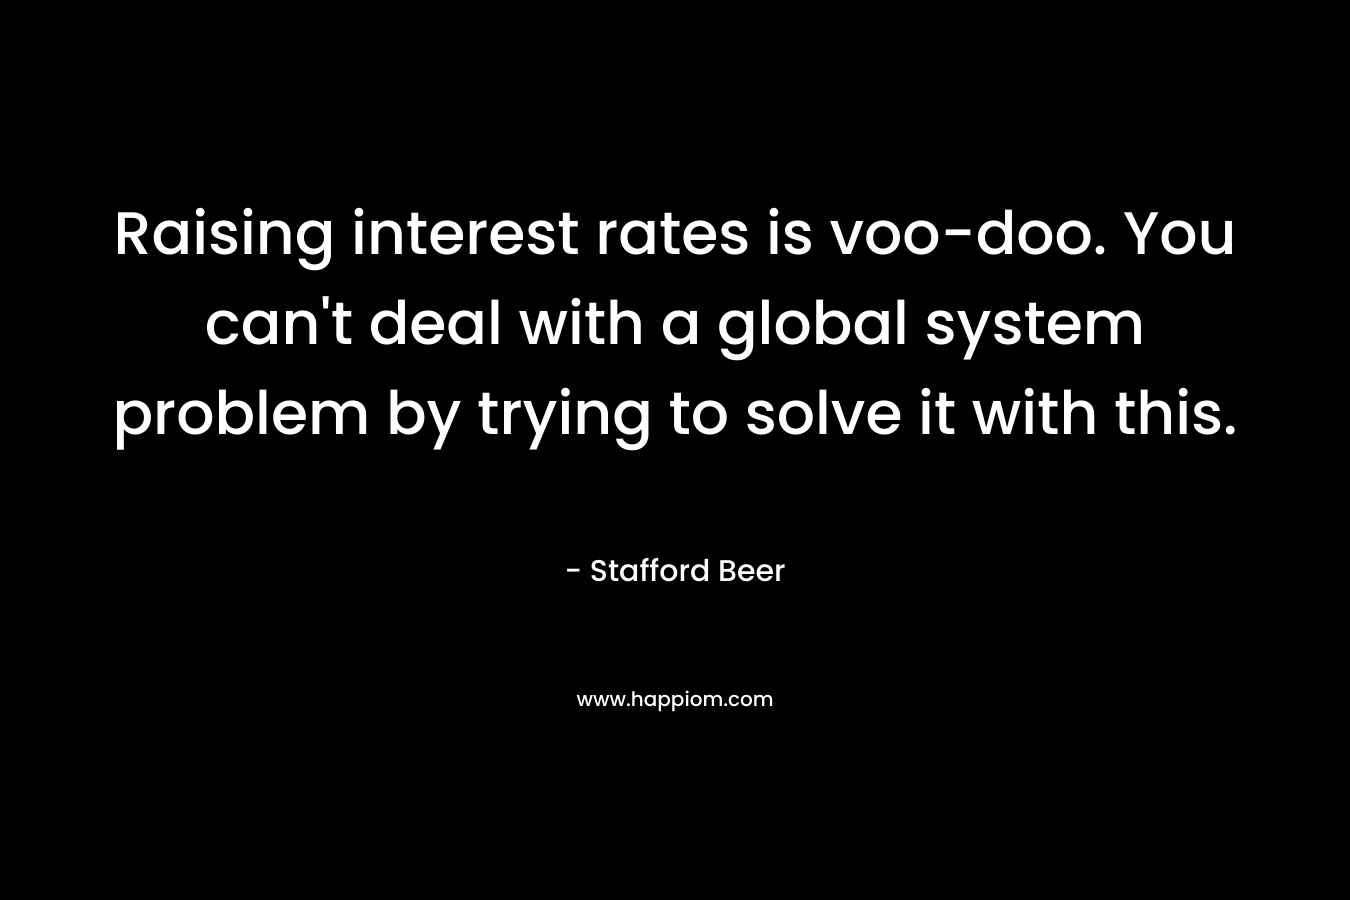 Raising interest rates is voo-doo. You can’t deal with a global system problem by trying to solve it with this. – Stafford Beer